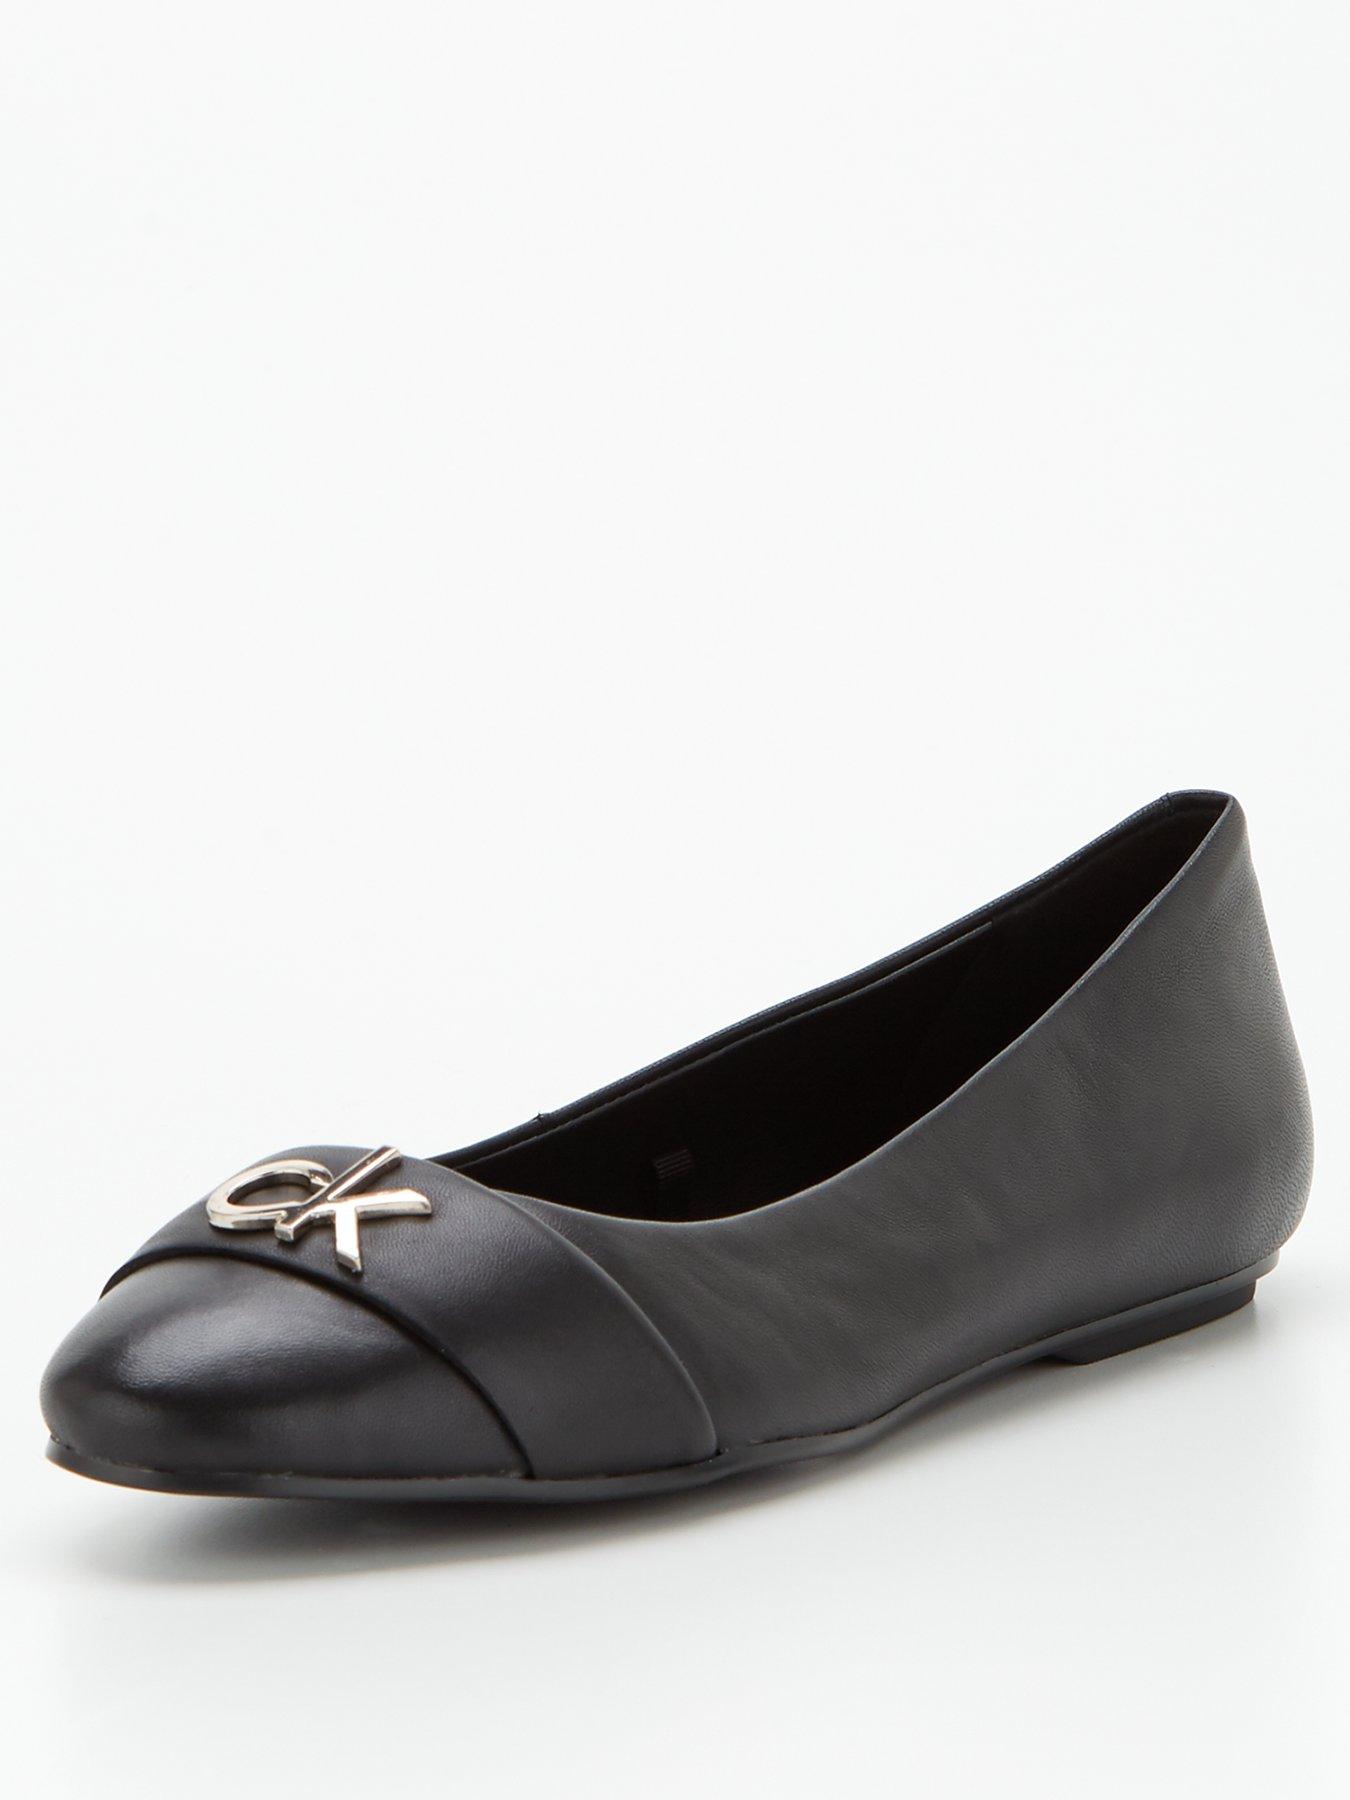 Shoes & boots Leather Ballerina Shoes - Black